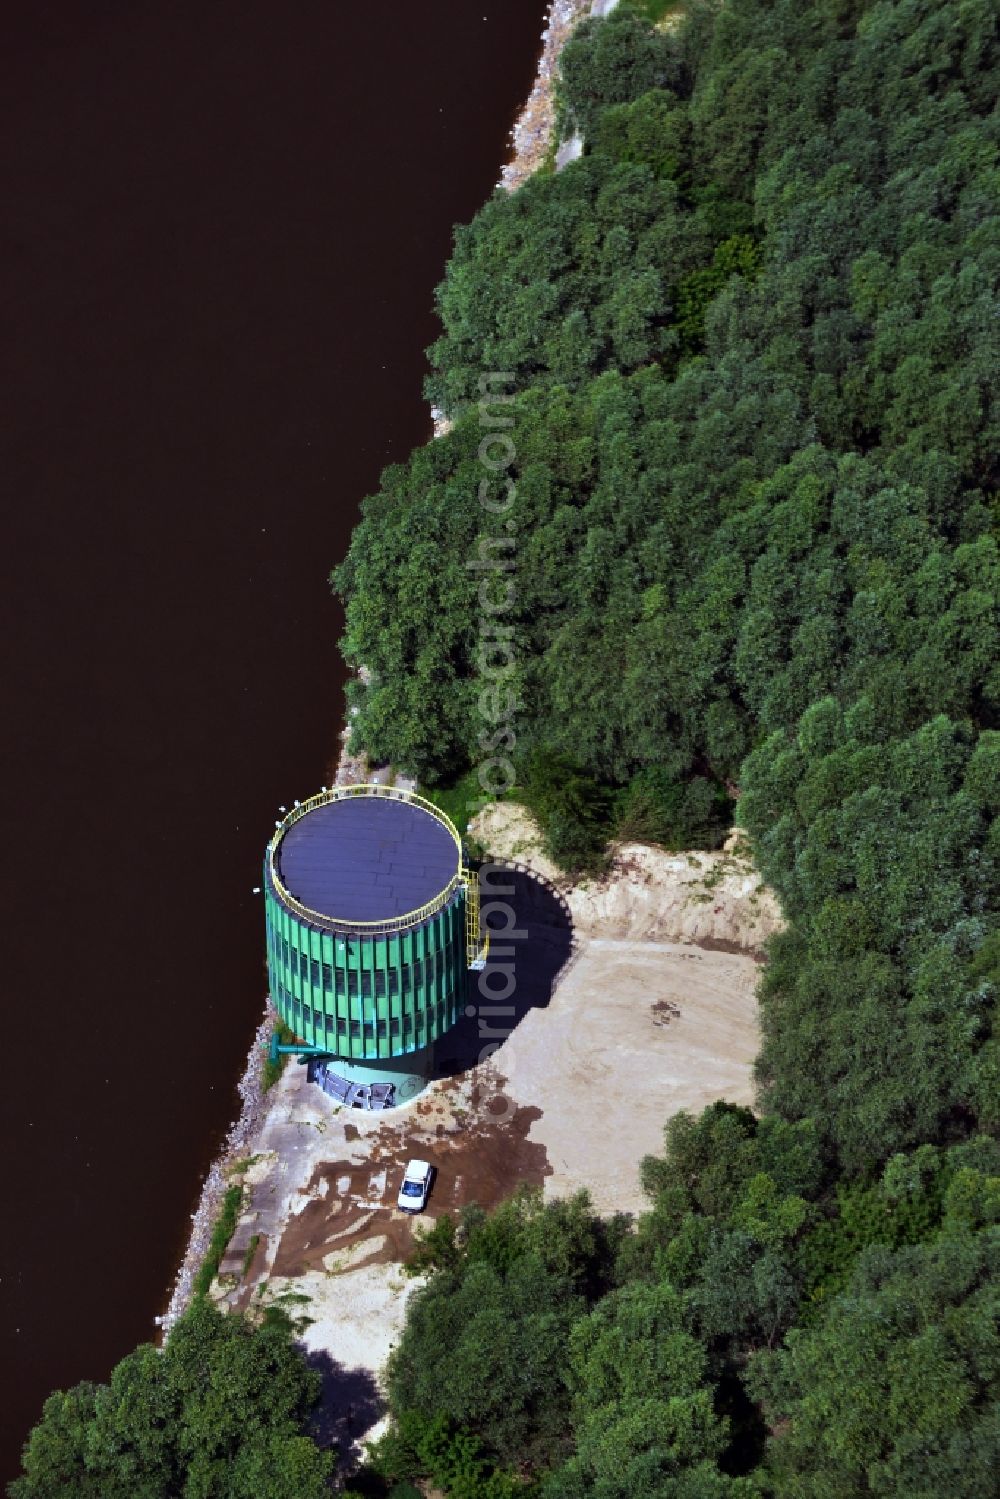 Aerial image Warschau - Water tank on the Northern riverbank of the river Wisla in the East of Warsaw in Poland. The flamboyant turquoise tank is located right on the regulated bank in a forest